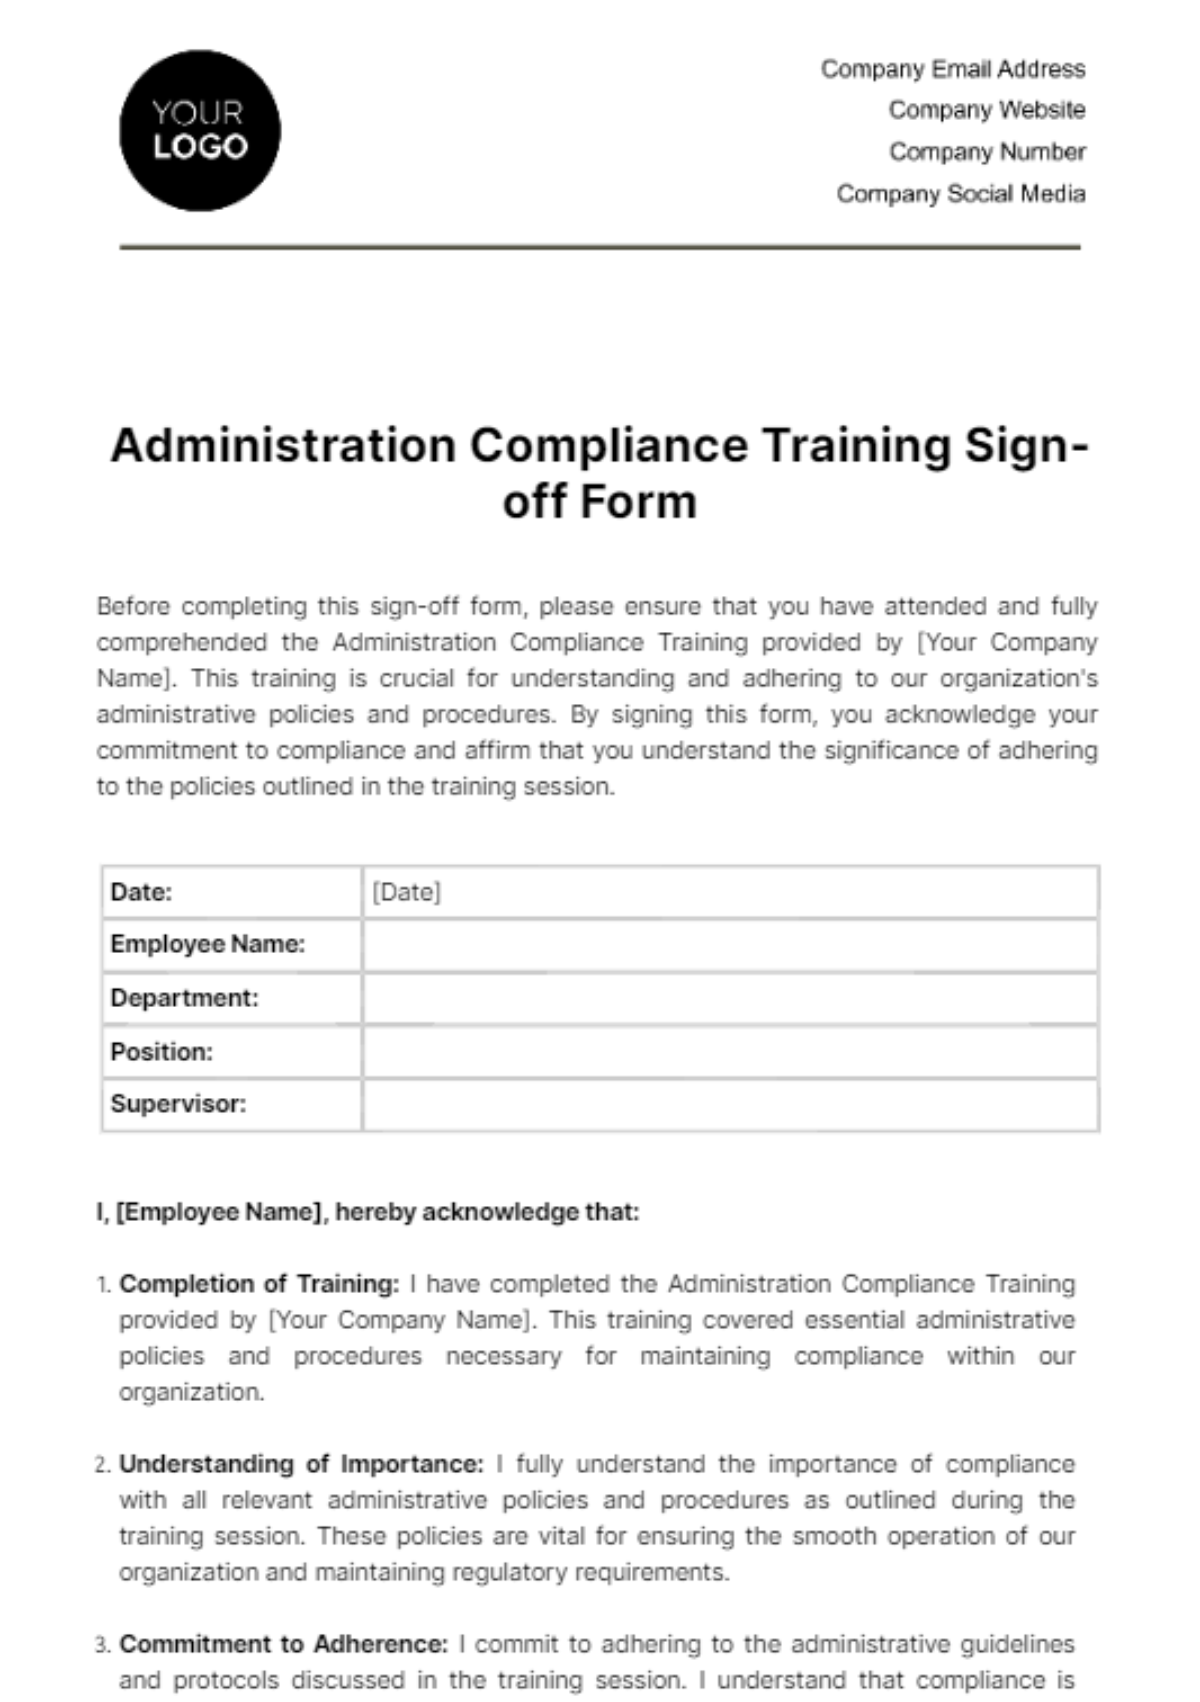 Free Administration Compliance Training Sign-off Form Template